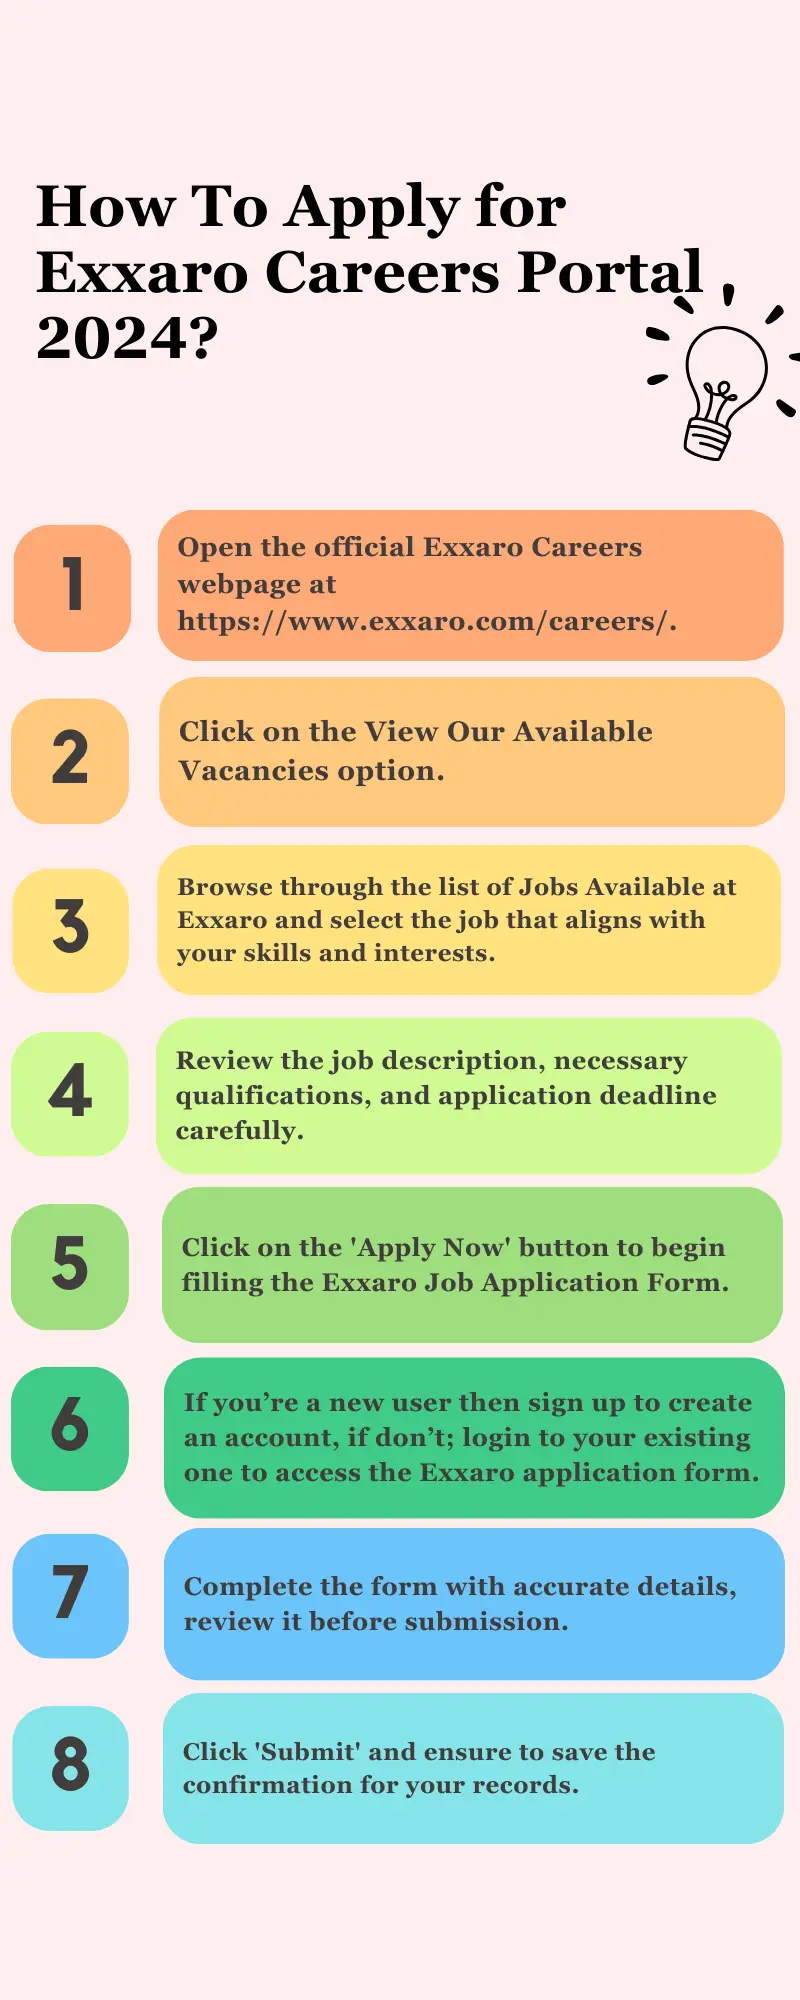 How To Apply for Exxaro Careers Portal 2024?